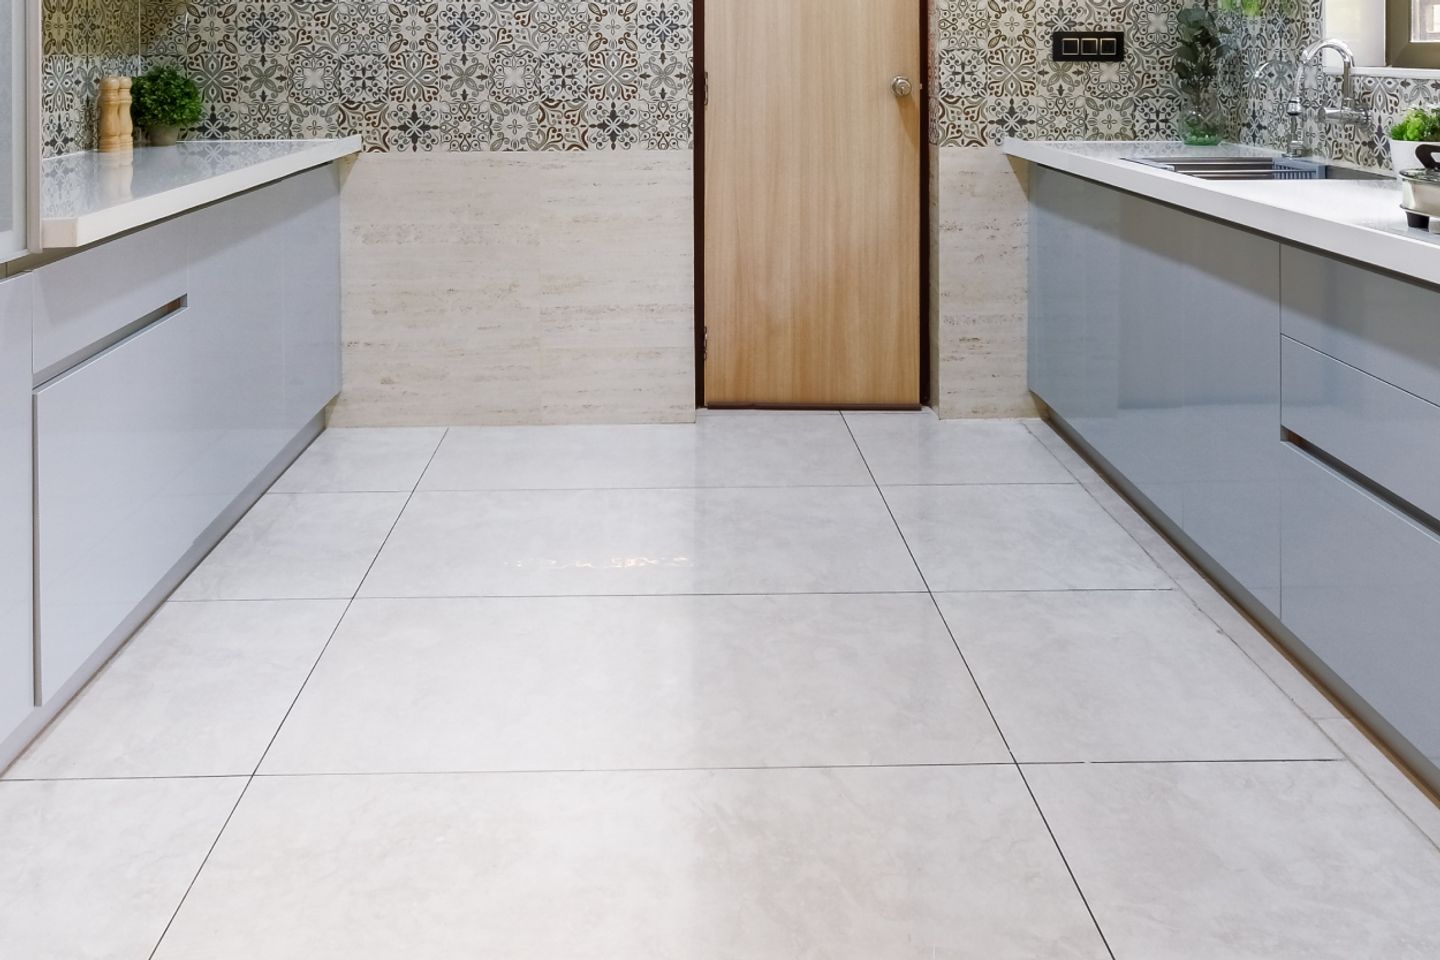 Light Beige Ceramic Floor Tiles With A Glossy Finish - Livspace